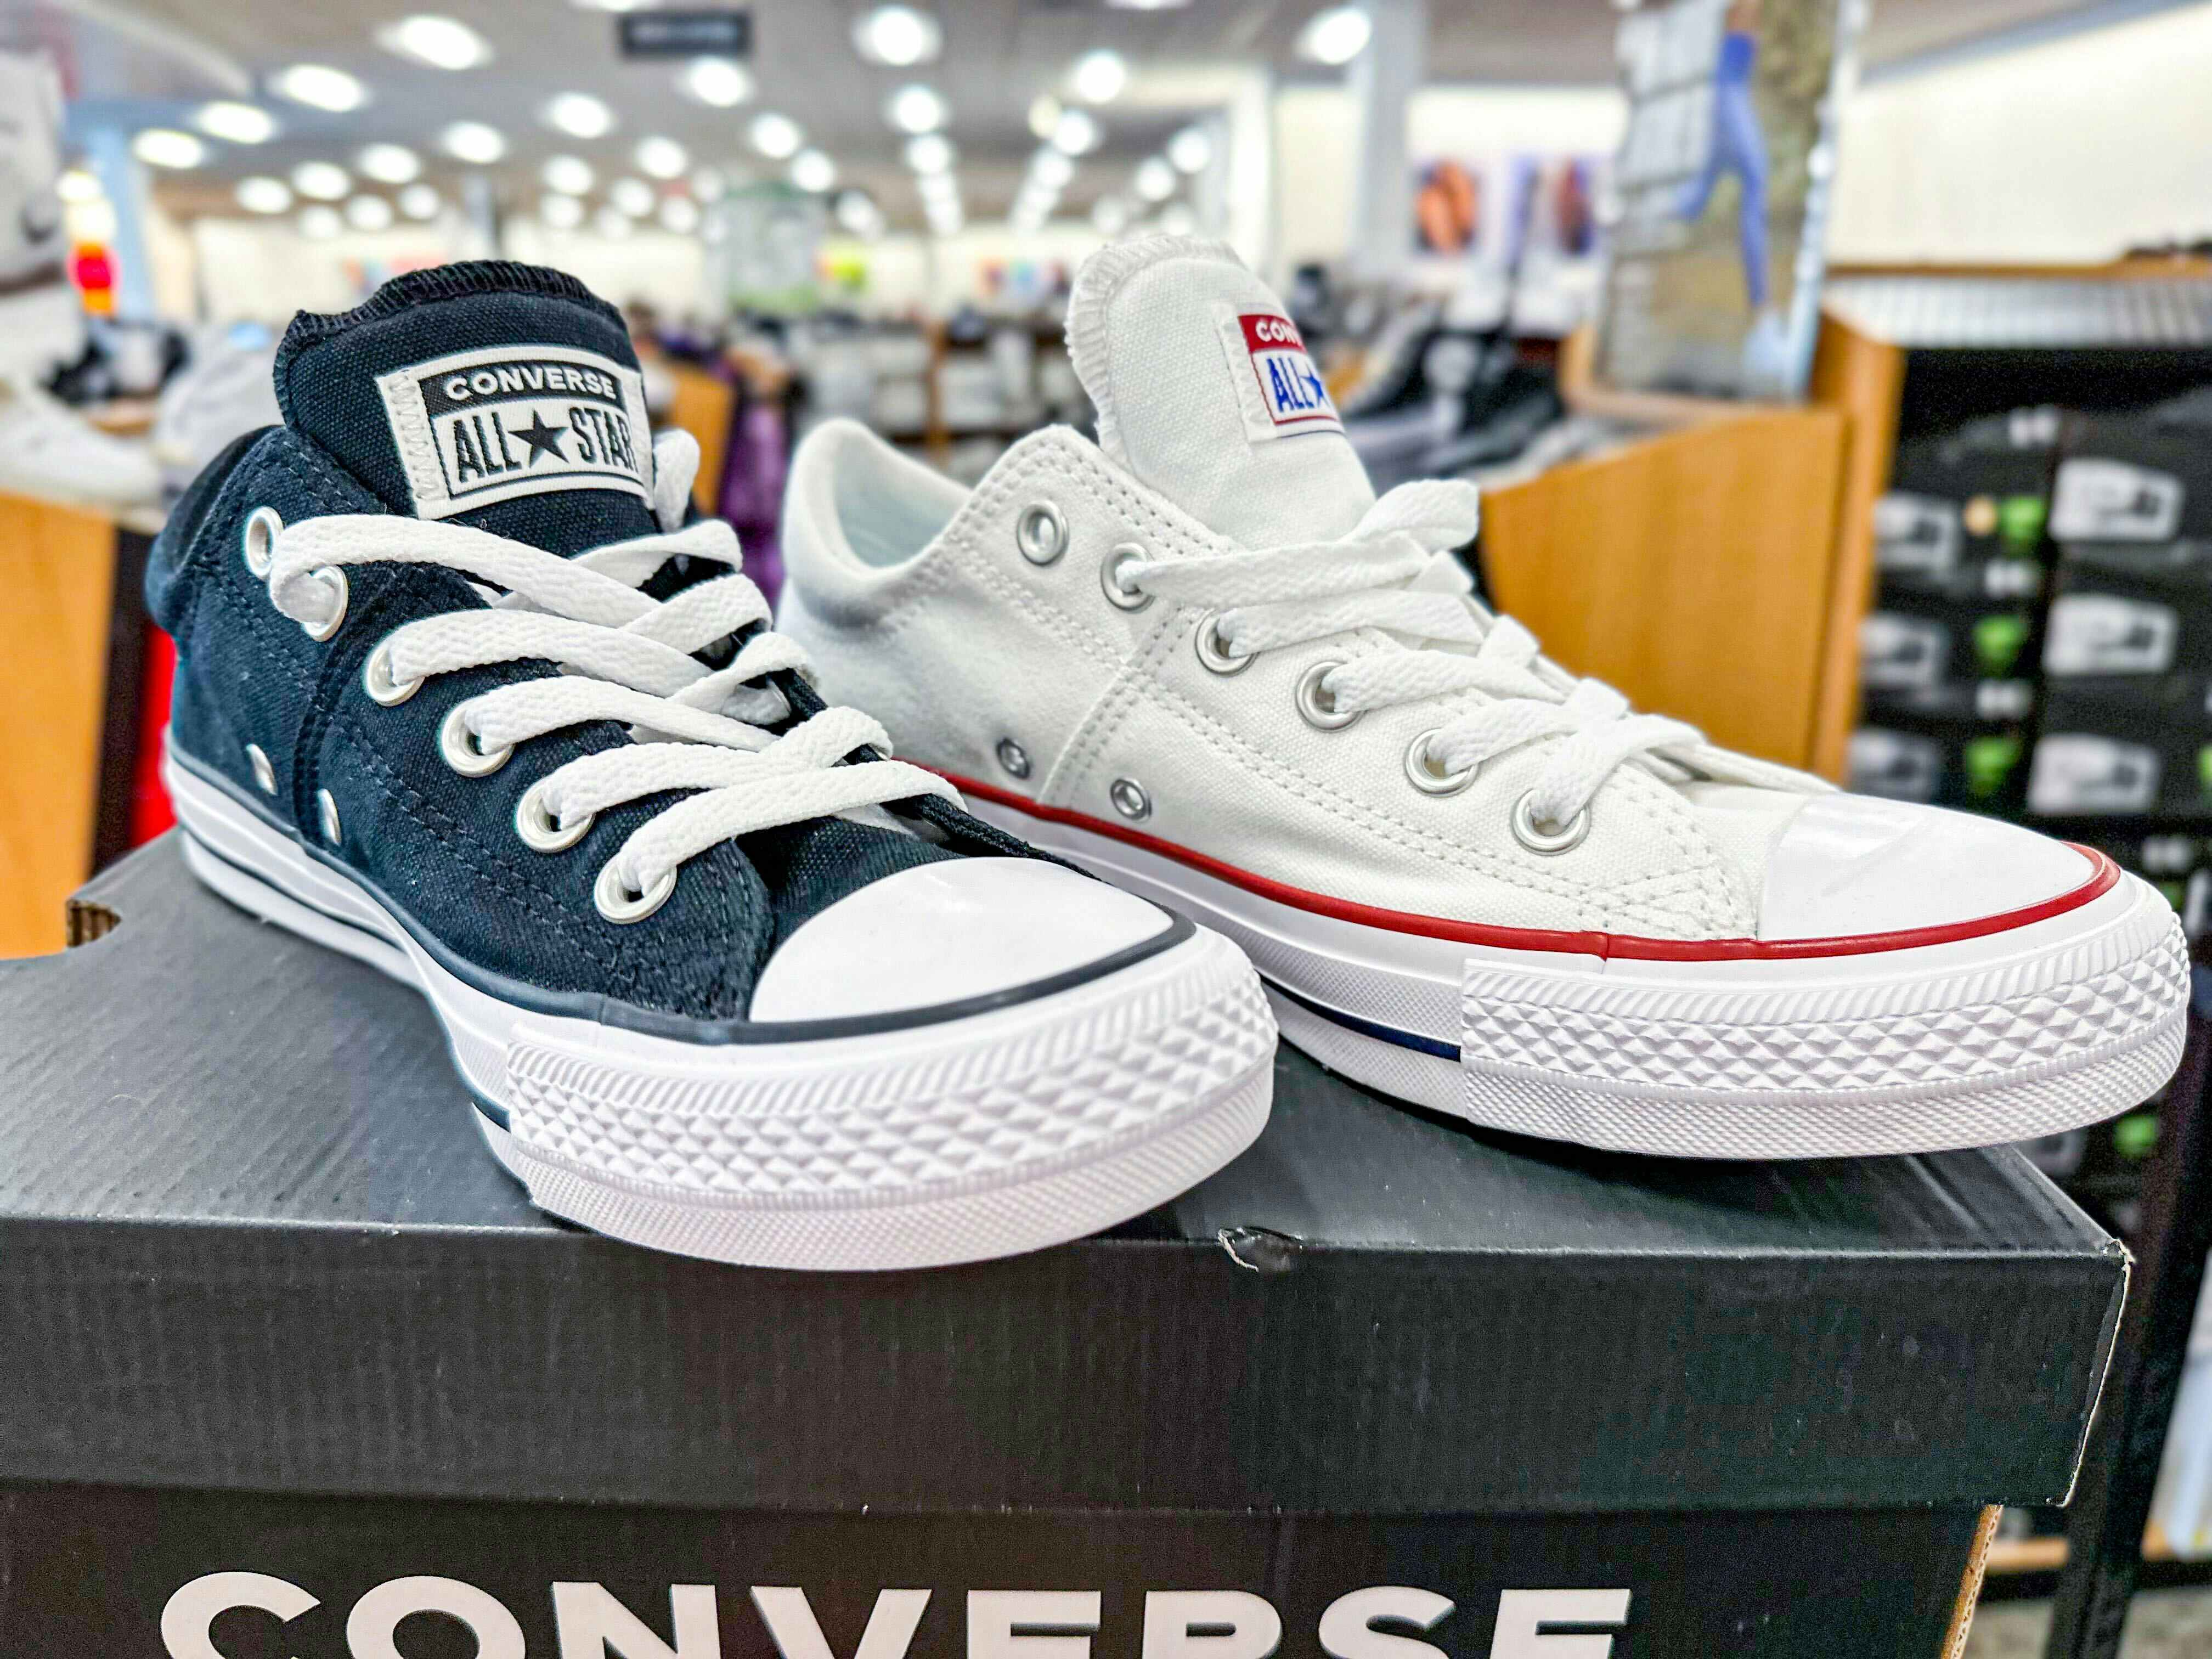 Converse Sneakers, as Low as $22 for Adults (Free Shipping)